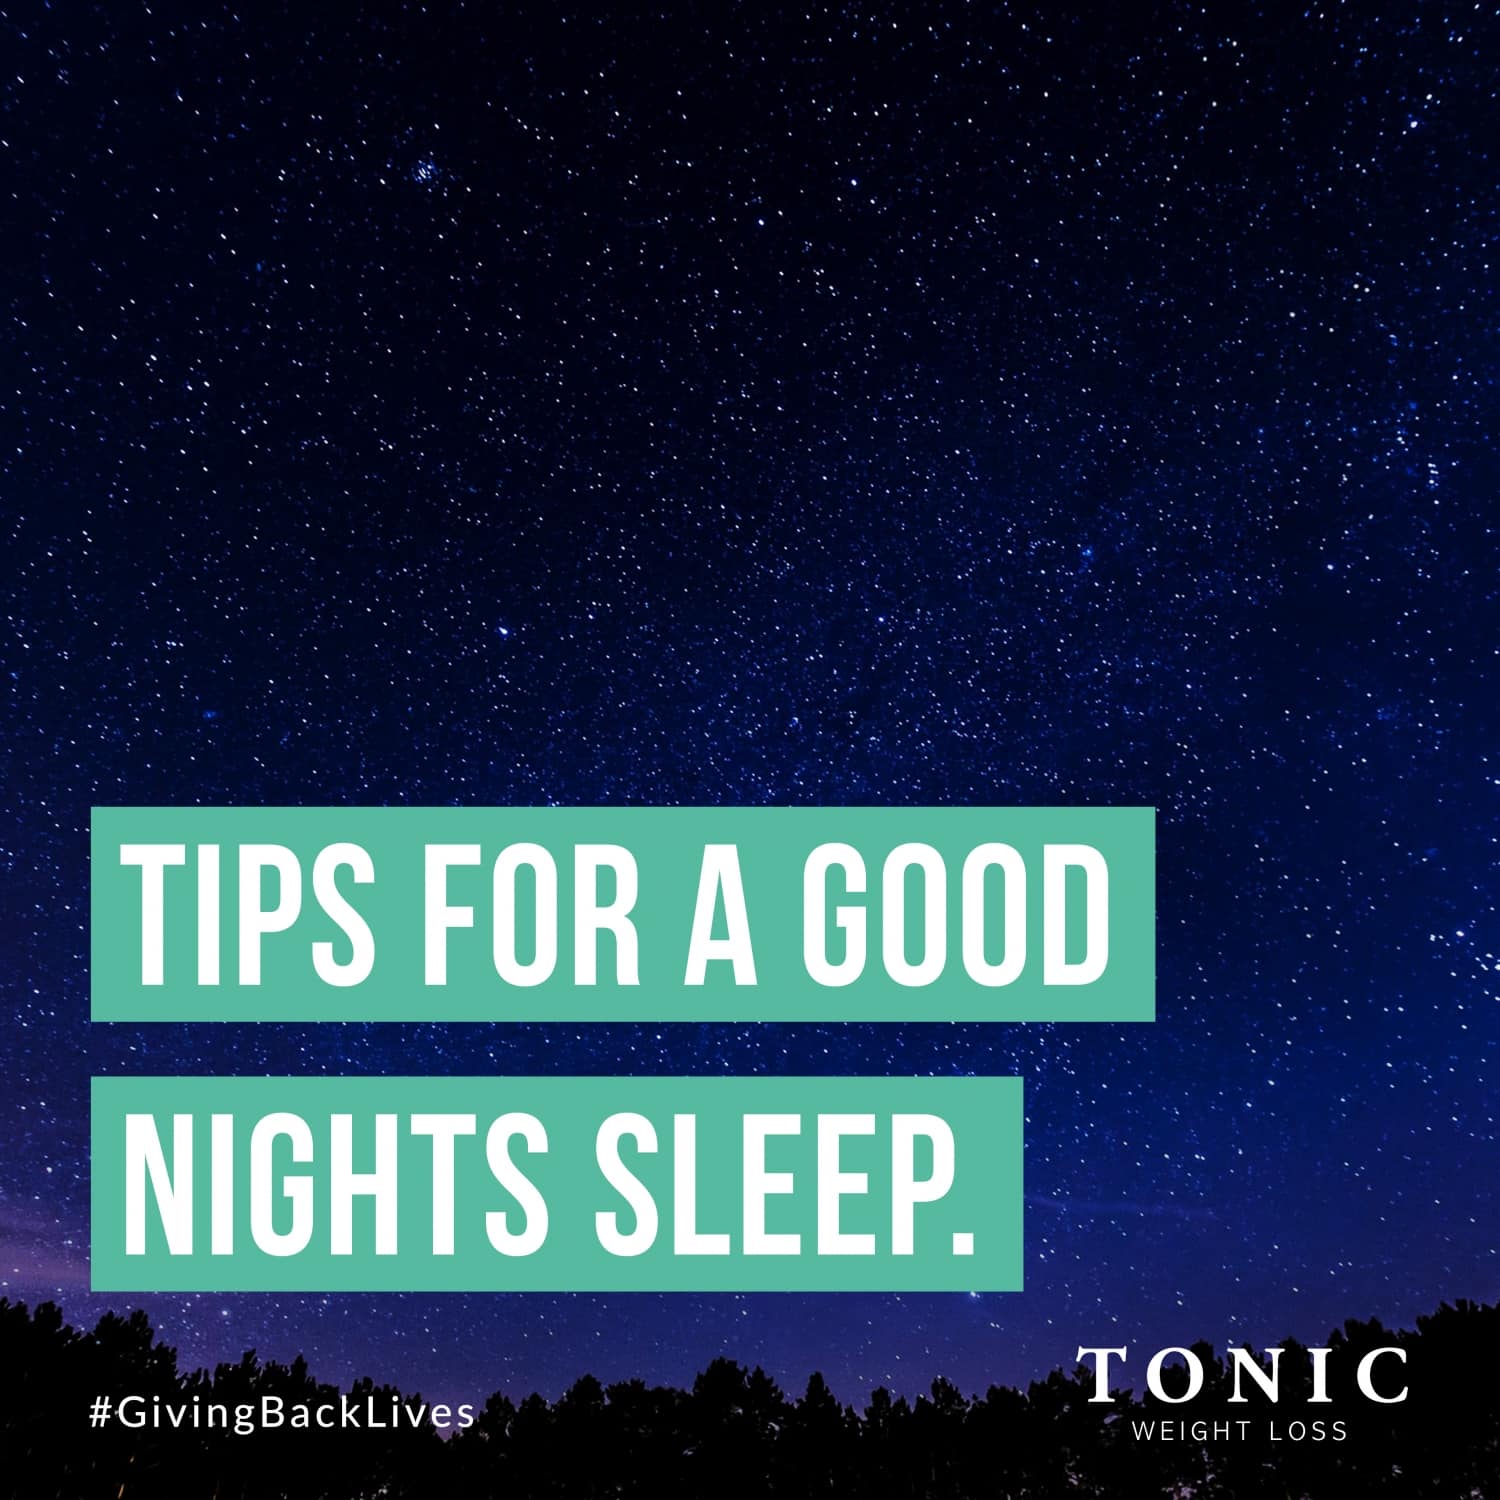 Tips for a Good Night Sleep - Tonic Weight Loss Surgery